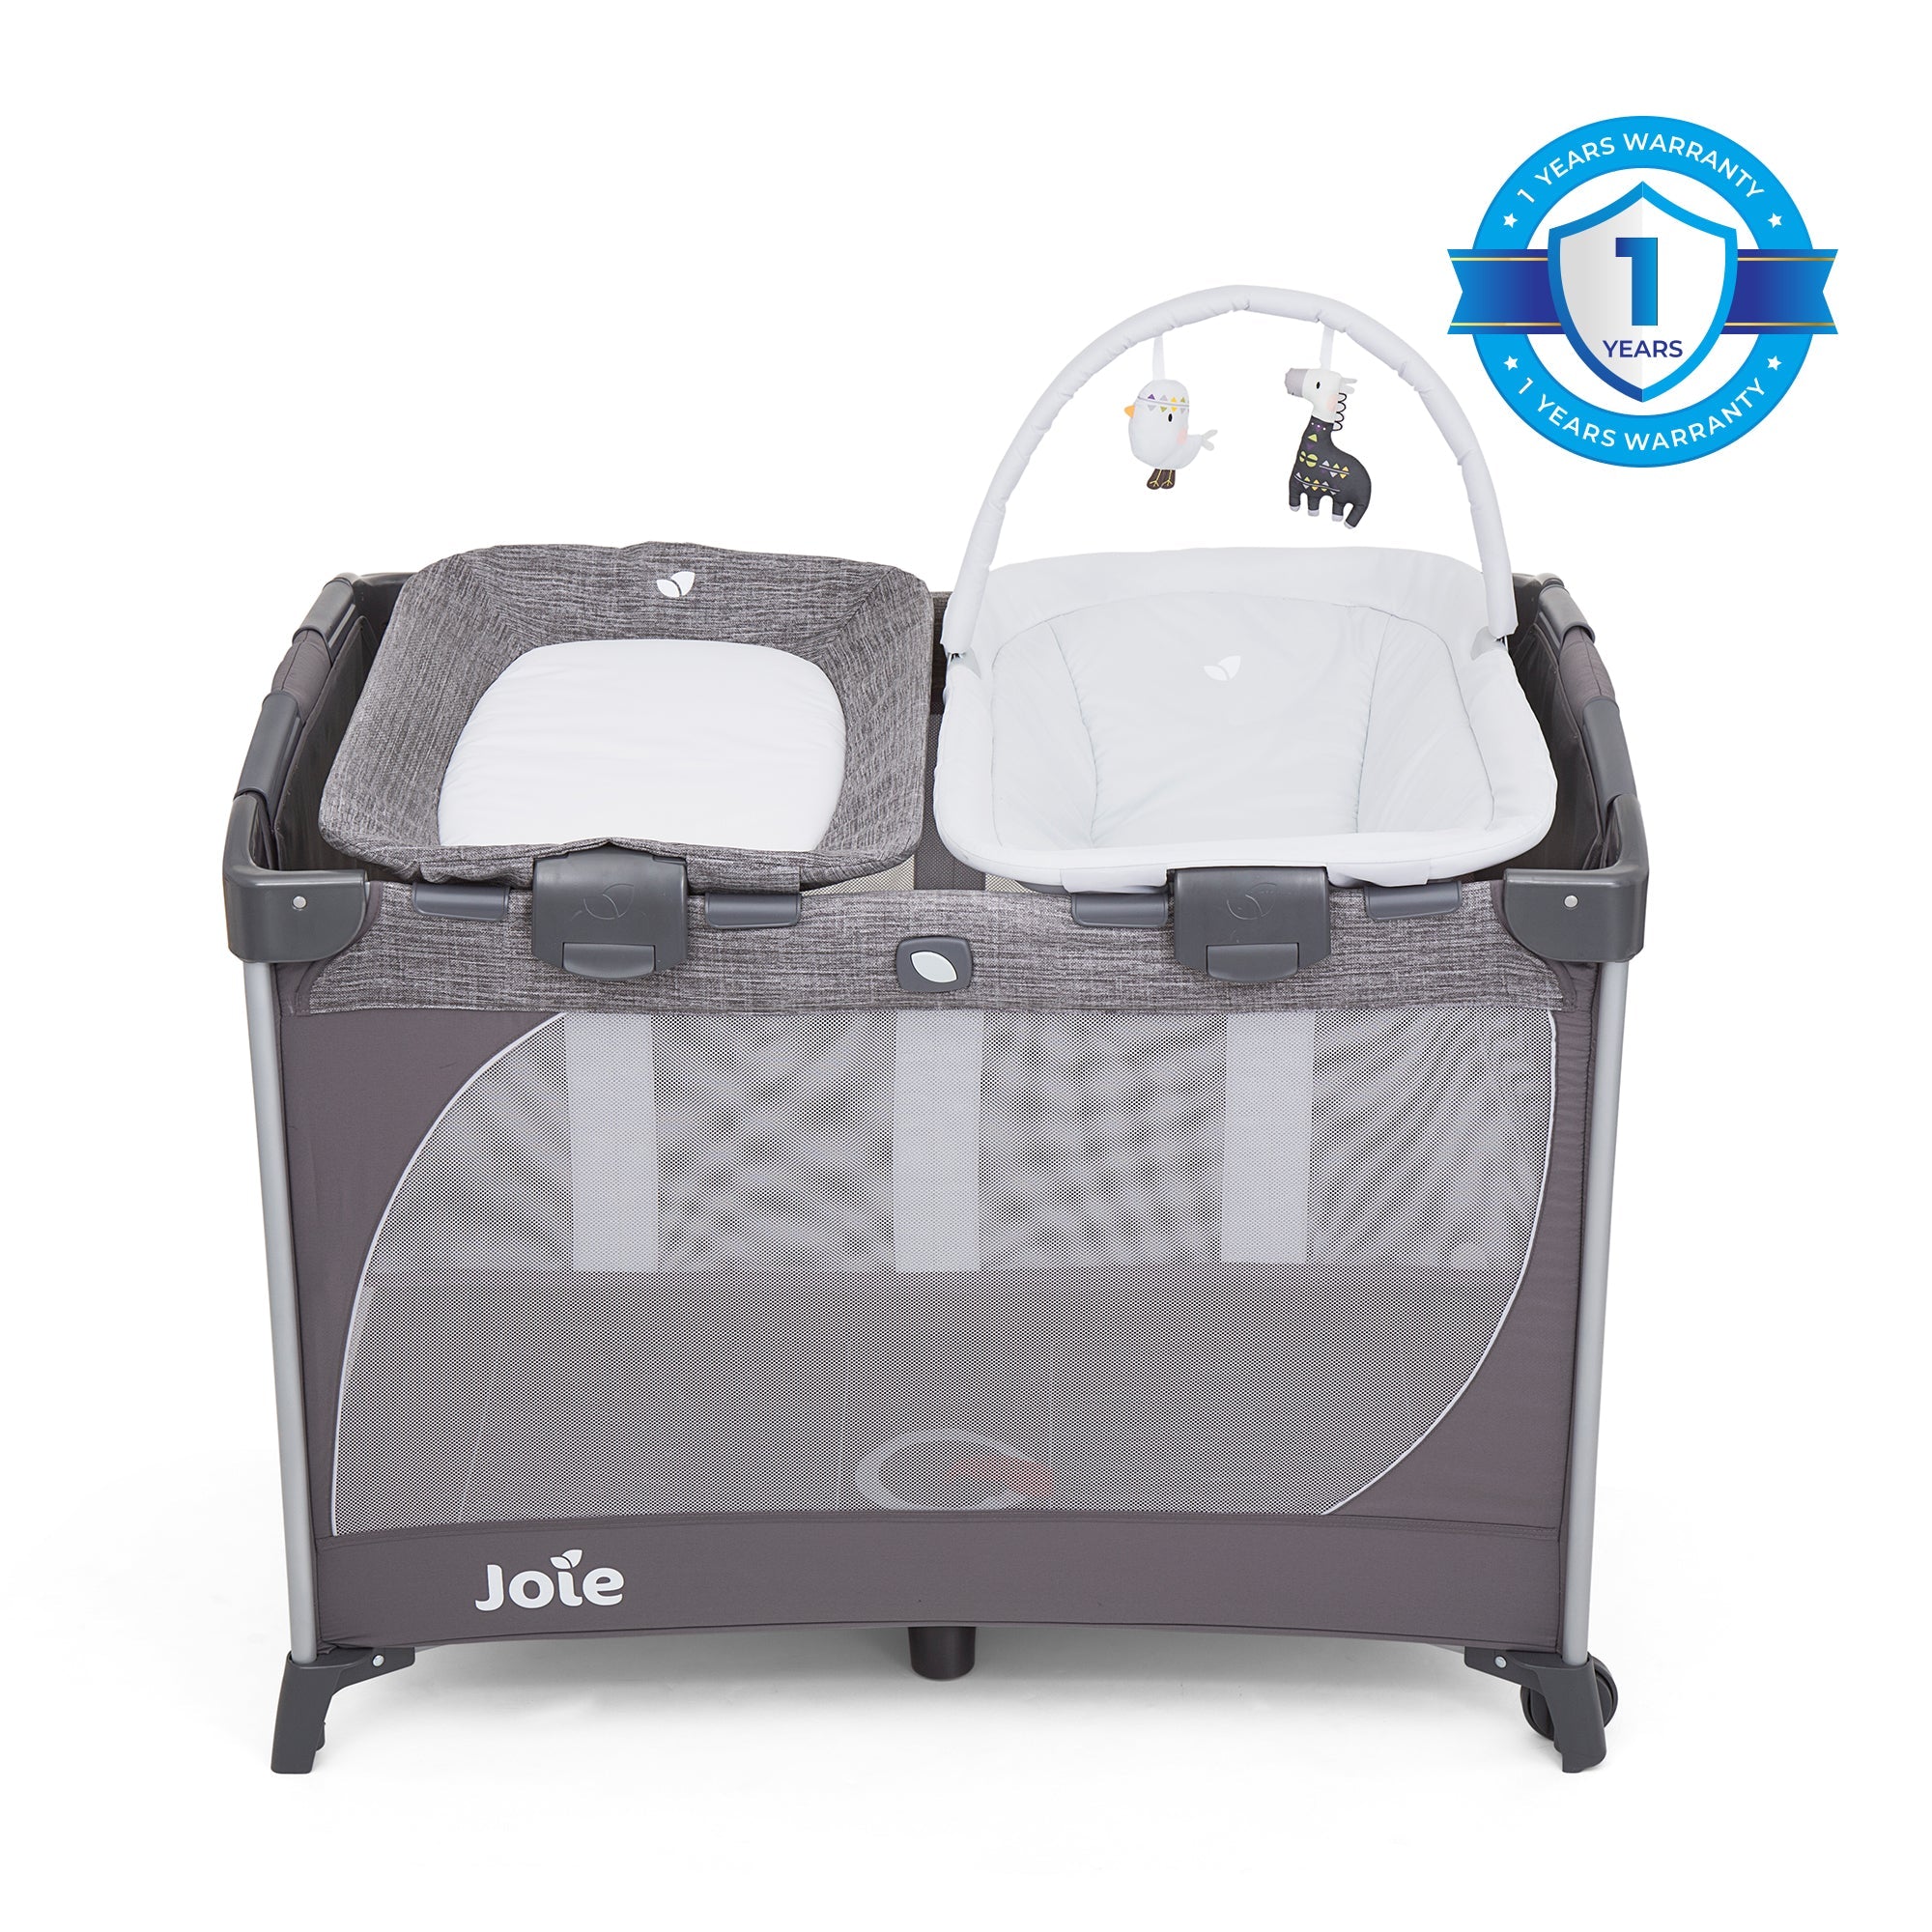 Joie Commuter Change & Snooze Travel Cot || Fashion - Linen Grey || Birth+ to 36months - Toys4All.in